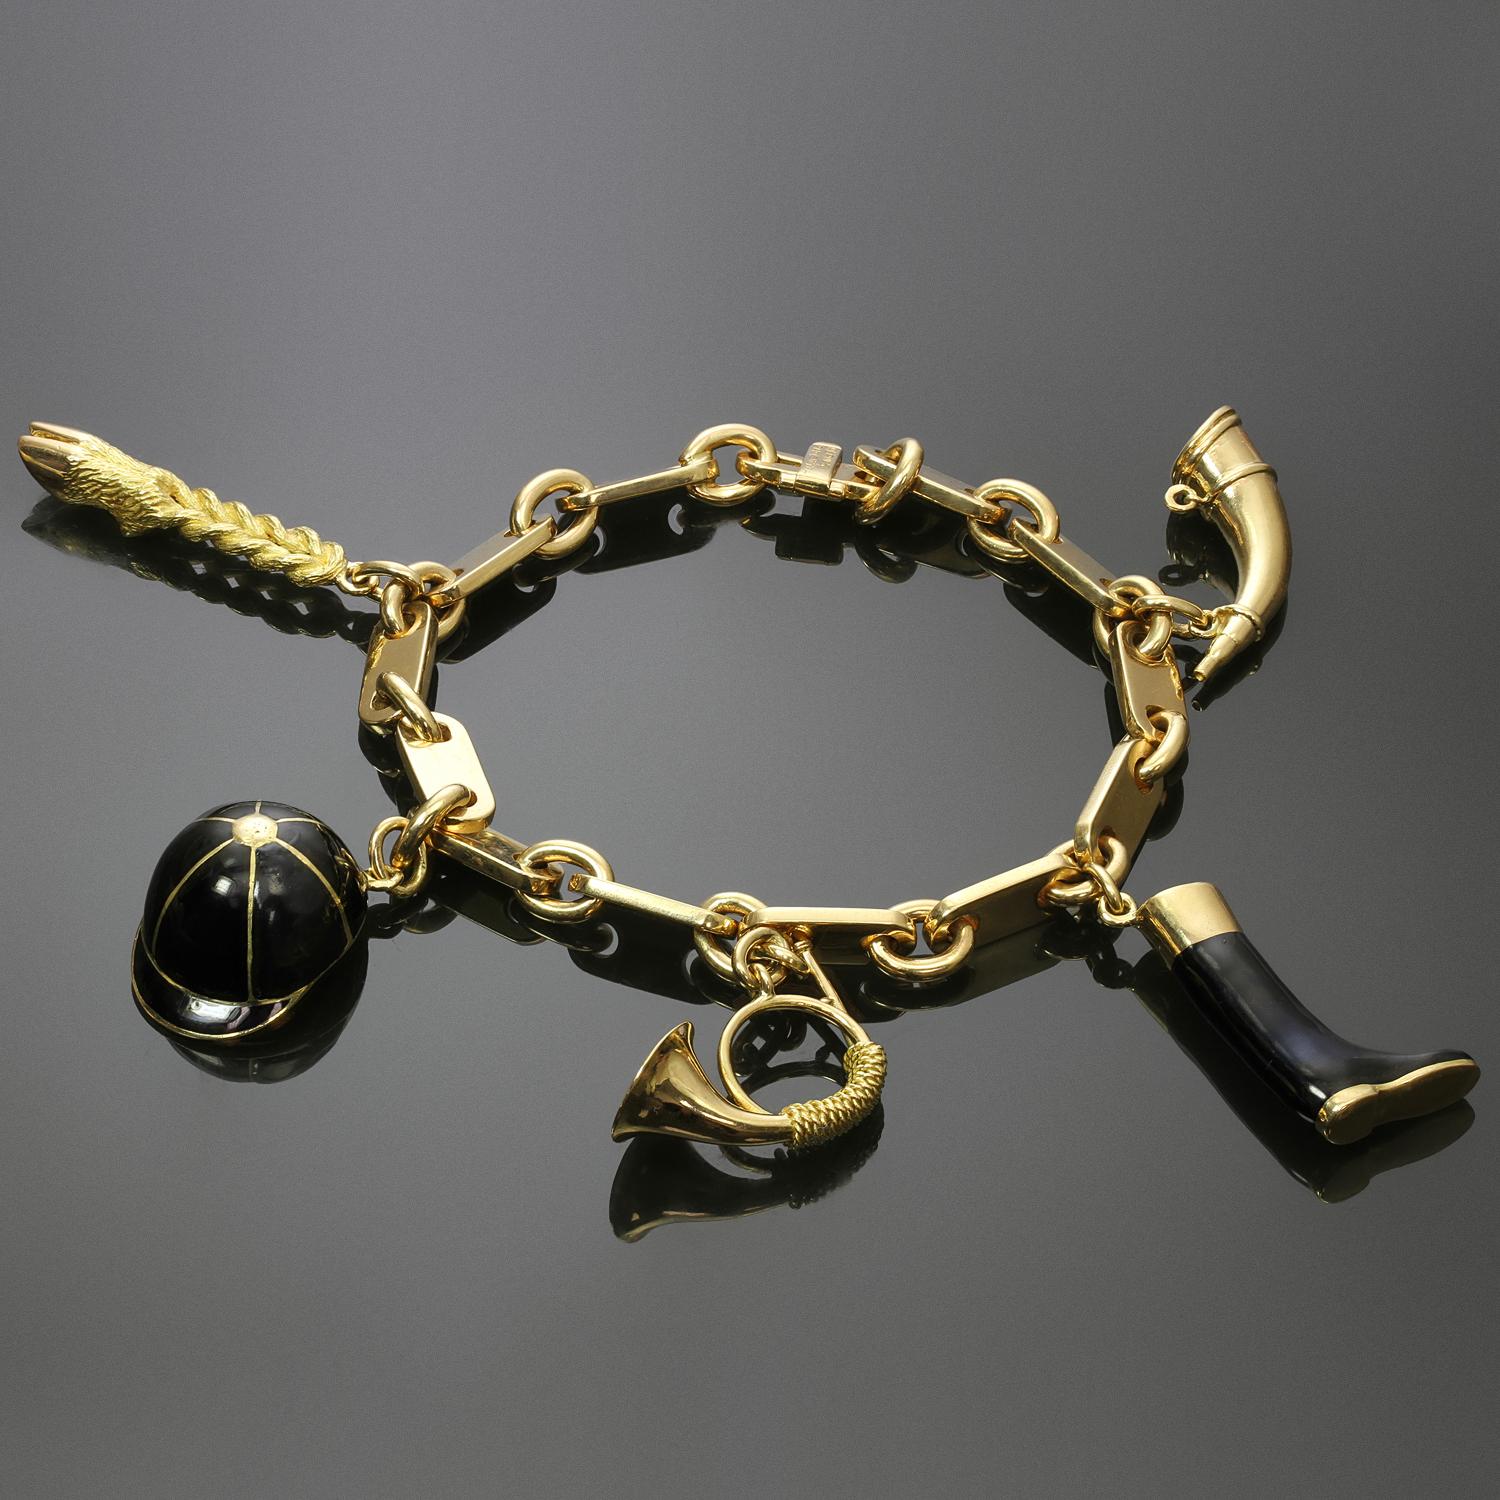 This gorgeous and unique Hermes link bracelet is crafted in 18k yellow gold and features six horse rider equestrian-themed charms with black enamel accents. Made in France, signed and numbered. Measurements: 7.25